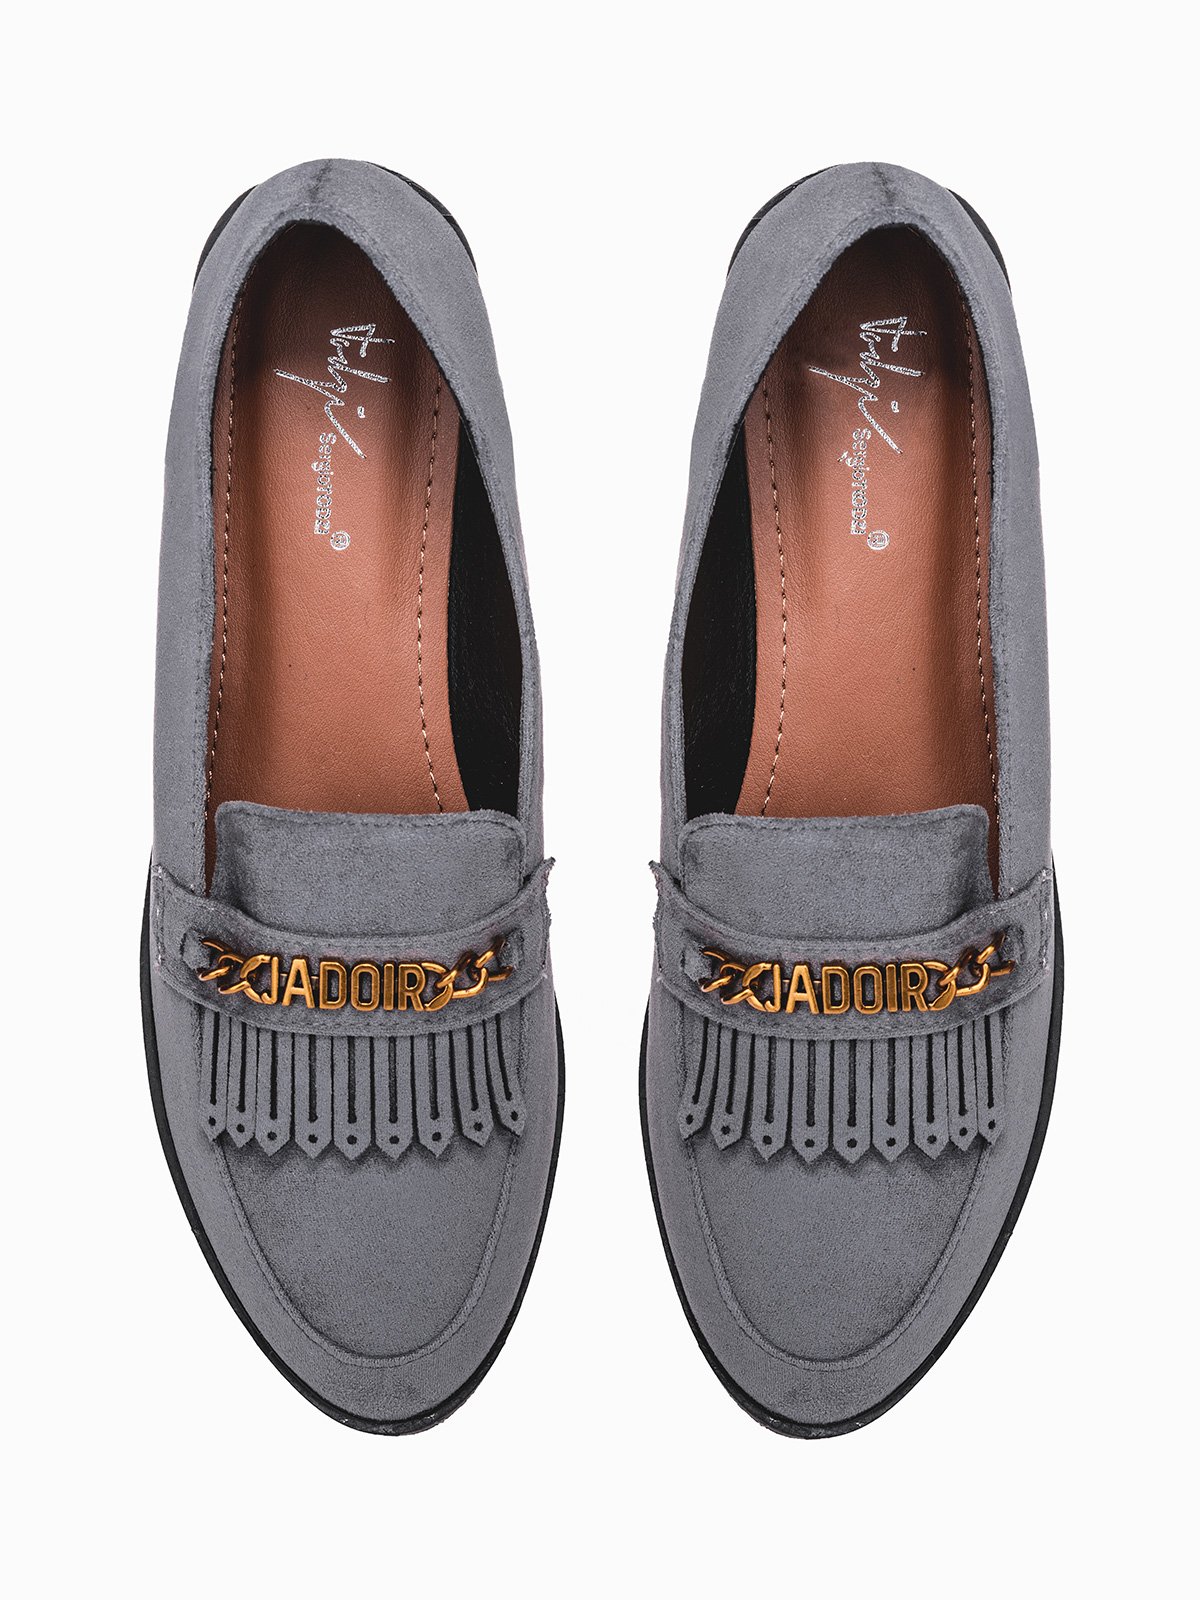 Women’s moccasins with tassels LR321 grey | MODONE wholesale - Clothing